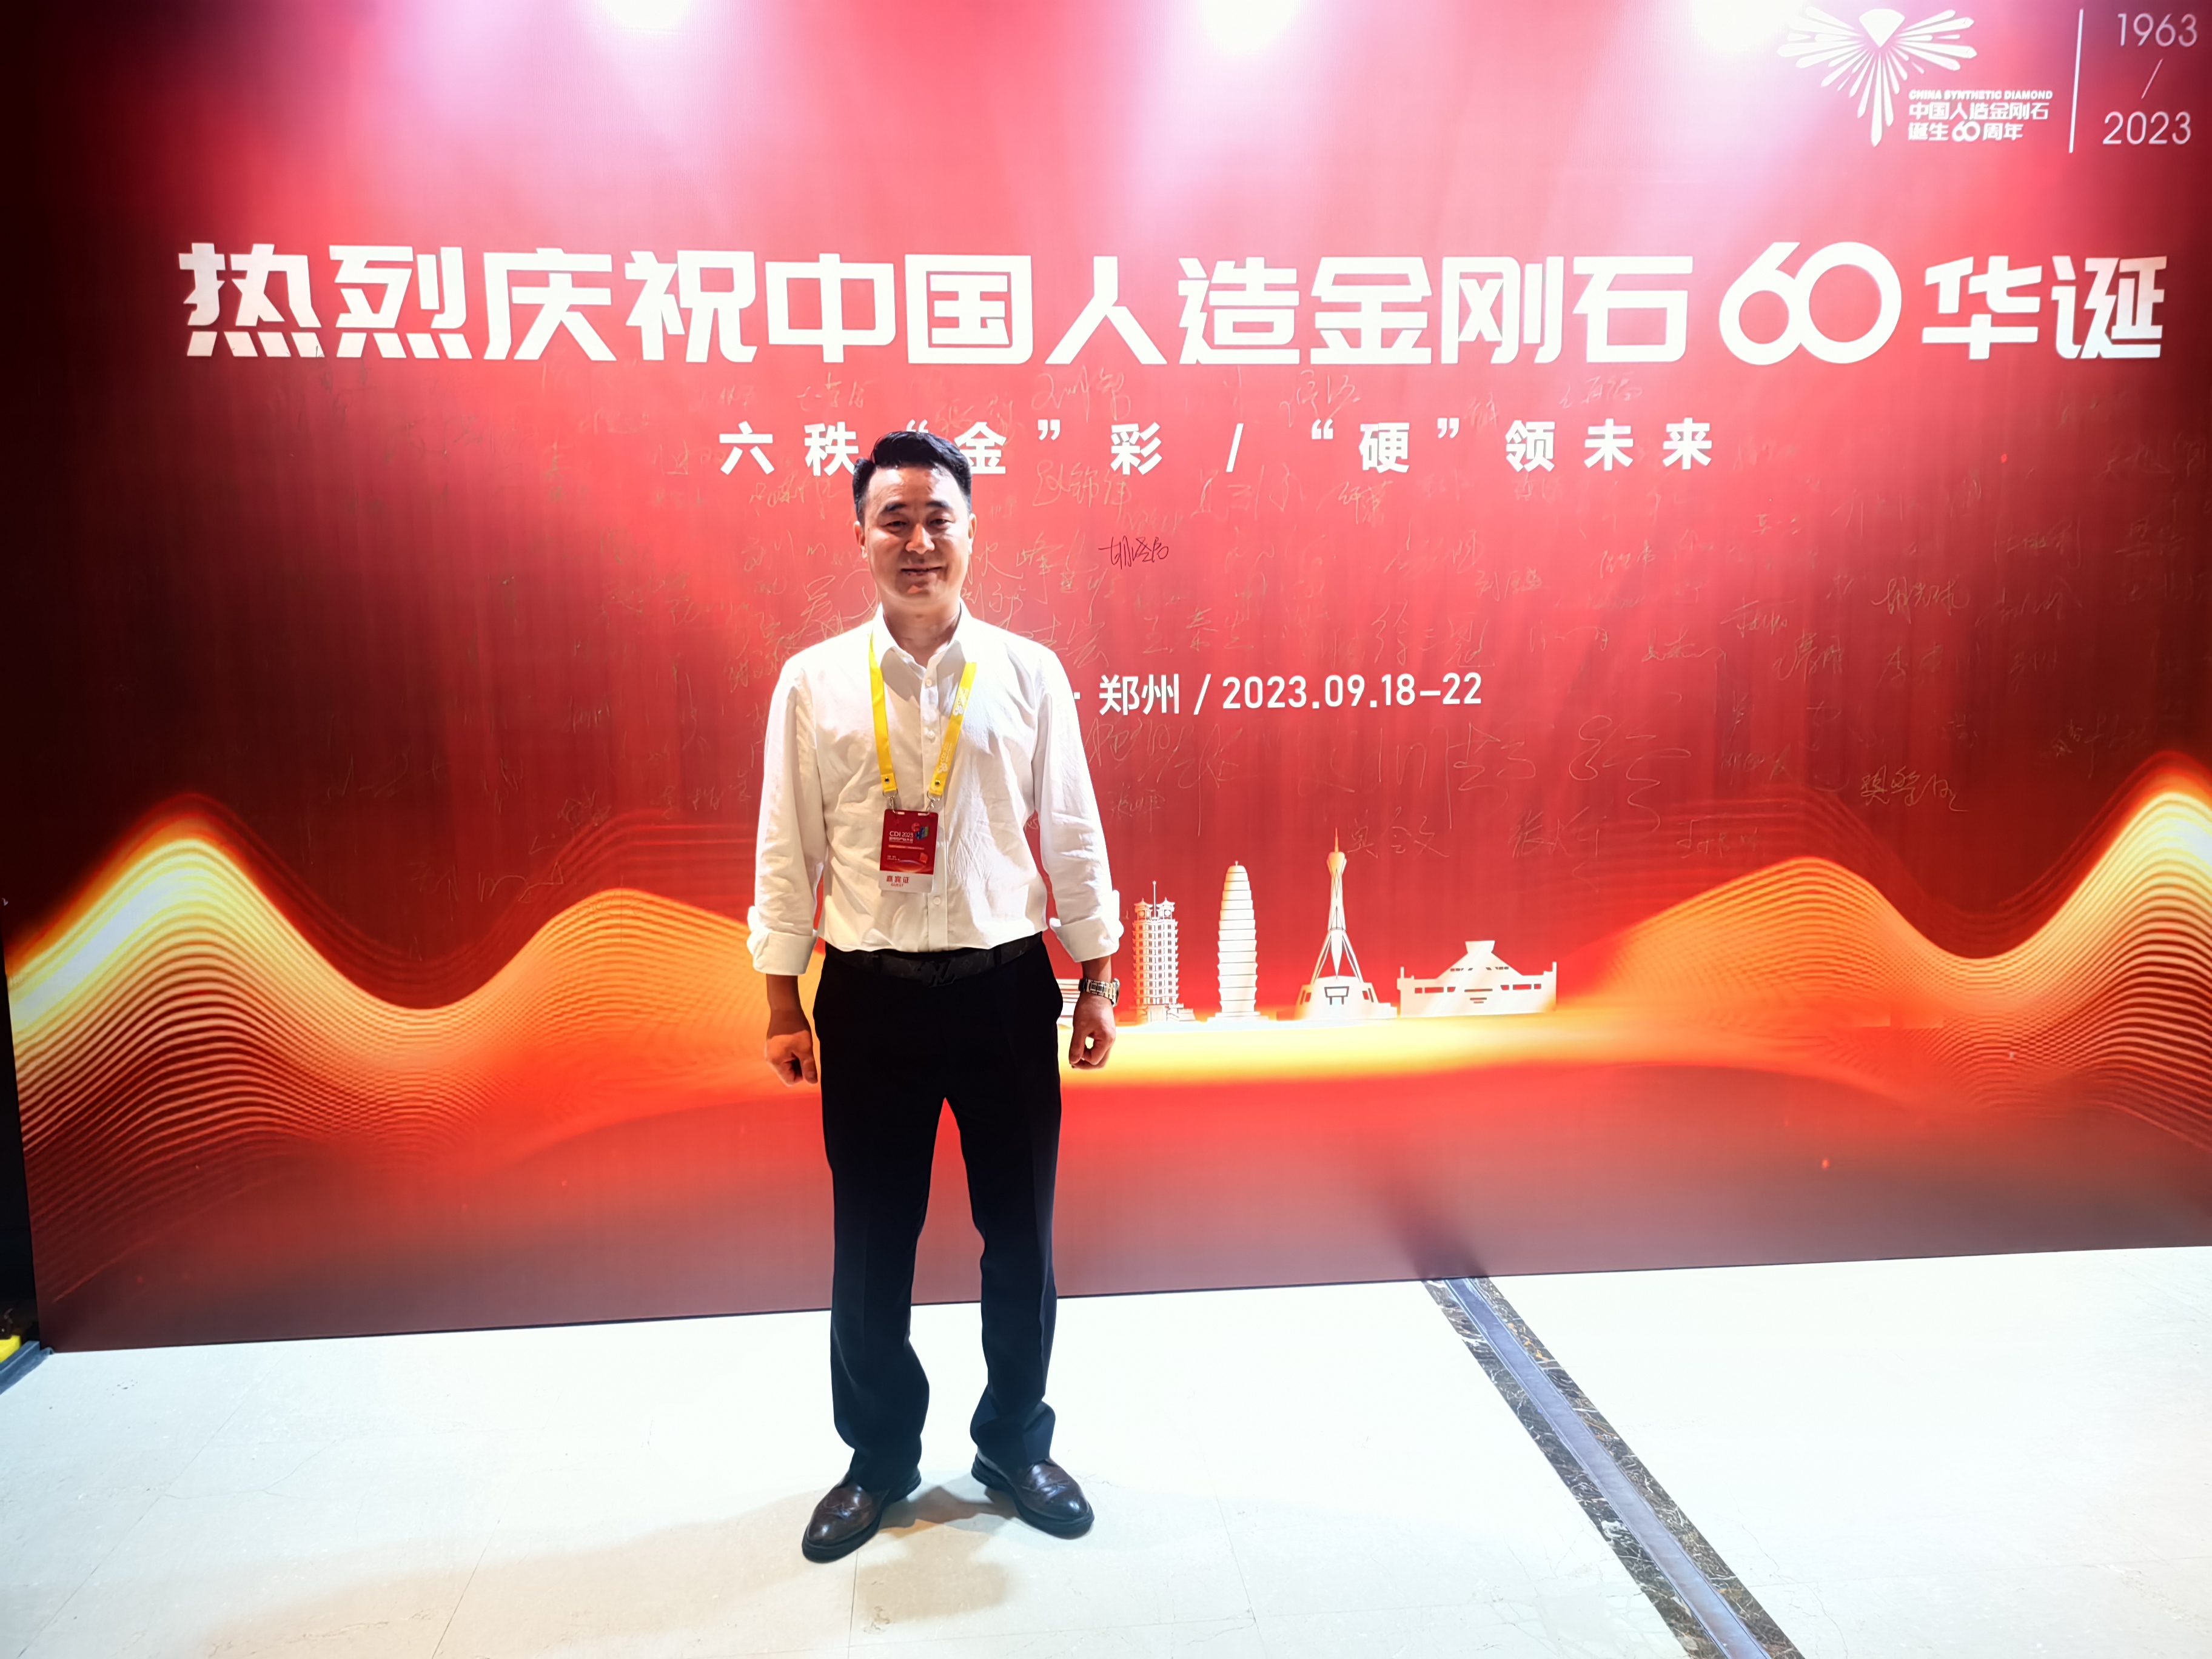 General manager Mr. Michael Tan participated in the 6th Abrasives & Grinding Exposition in Zhengzhou